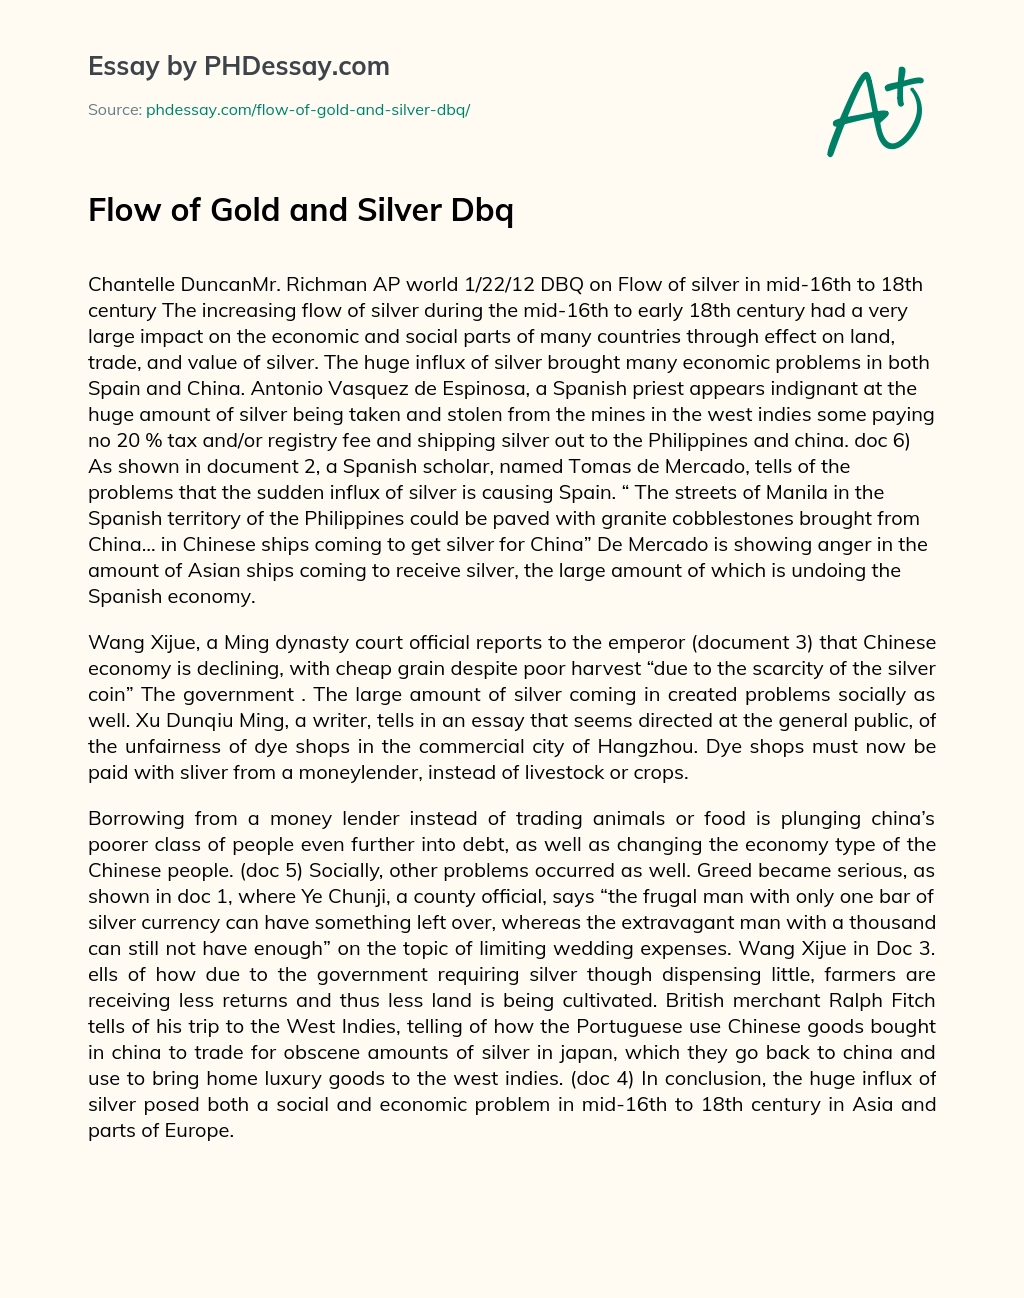 Flow of Gold and Silver Dbq essay